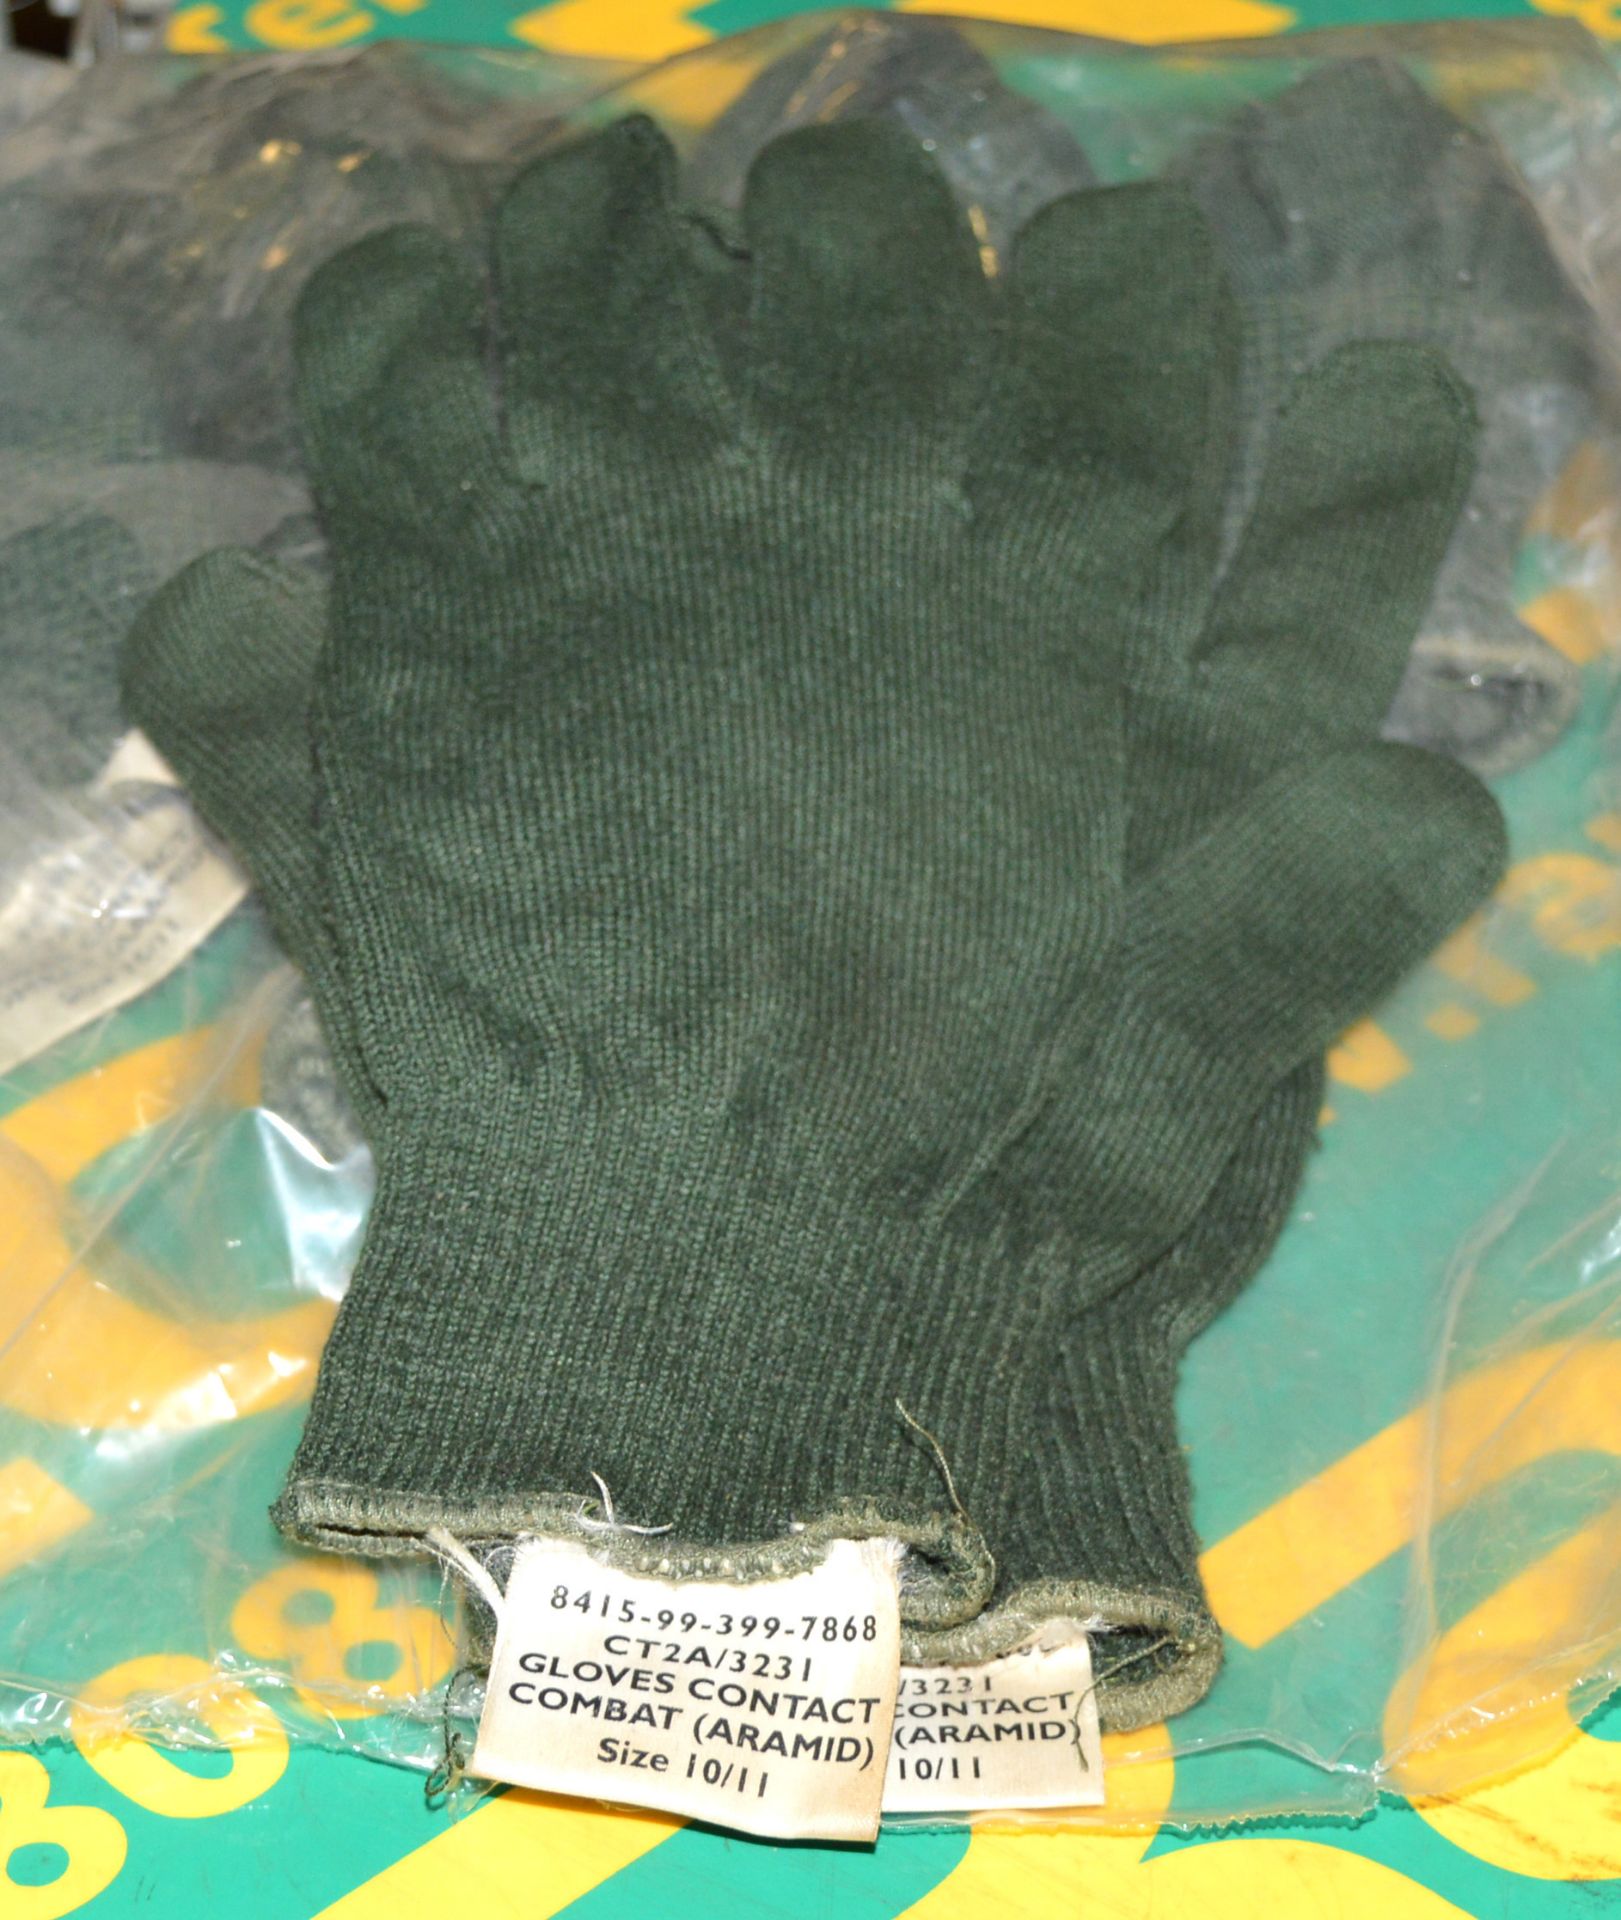 Approx 26x Pairs Gloves - Sizes 8 to 11. - Image 2 of 6